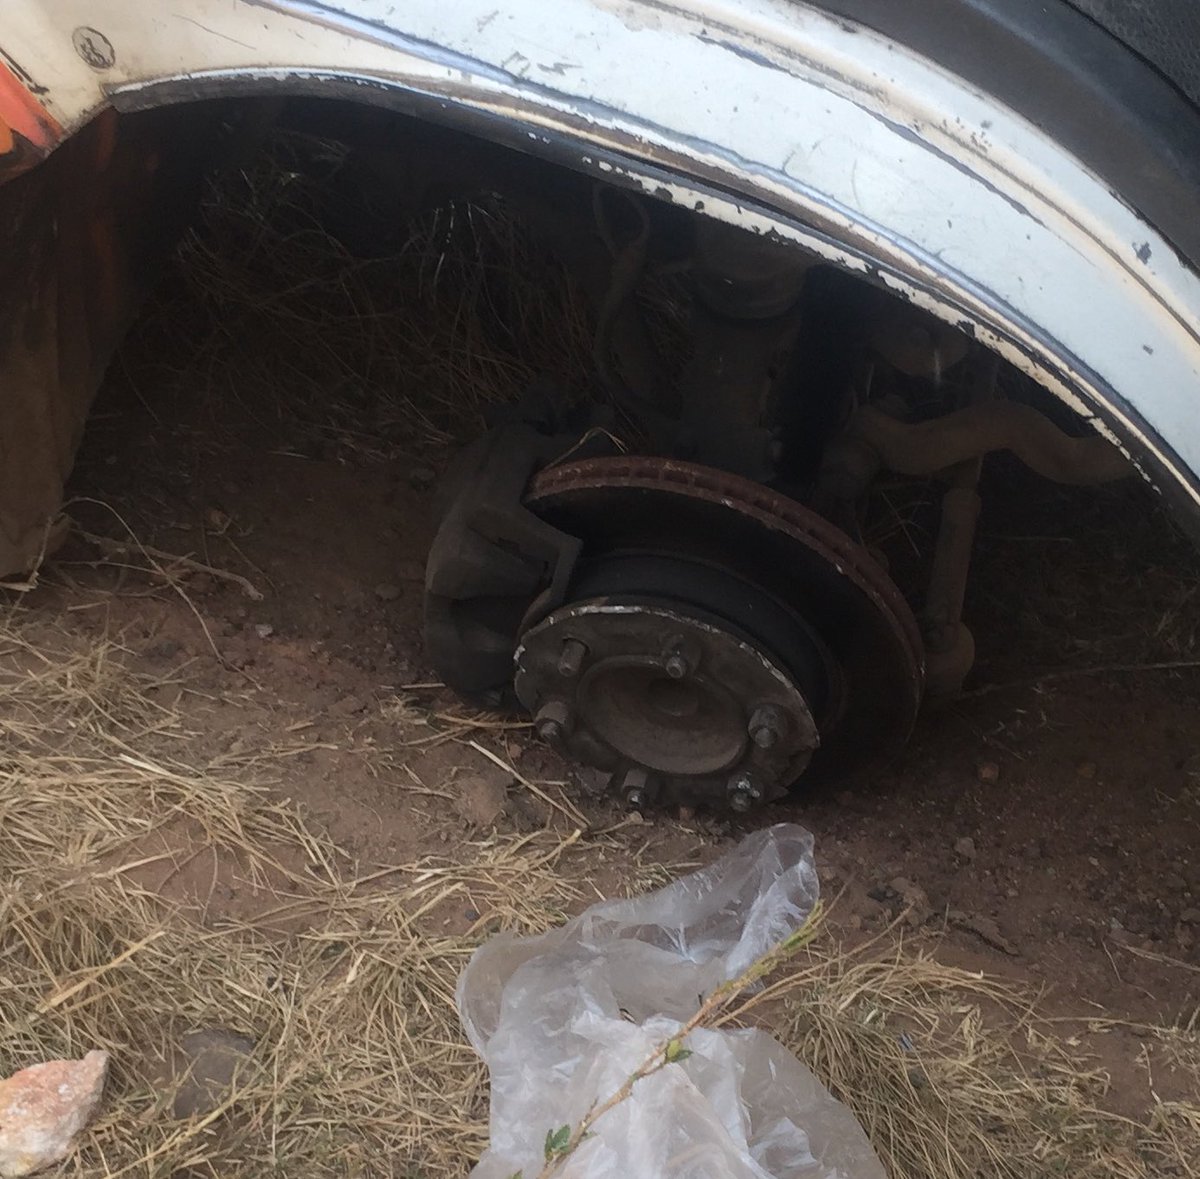 If you think there's no God, think again.

On our trip to Lagos from akure, full throttle, this bus tyre pulled off completely from the rim and headed straight for the Bush, all the bolts and nuts still in place. Imagine it, we're alive and the rest is history. #naijablog